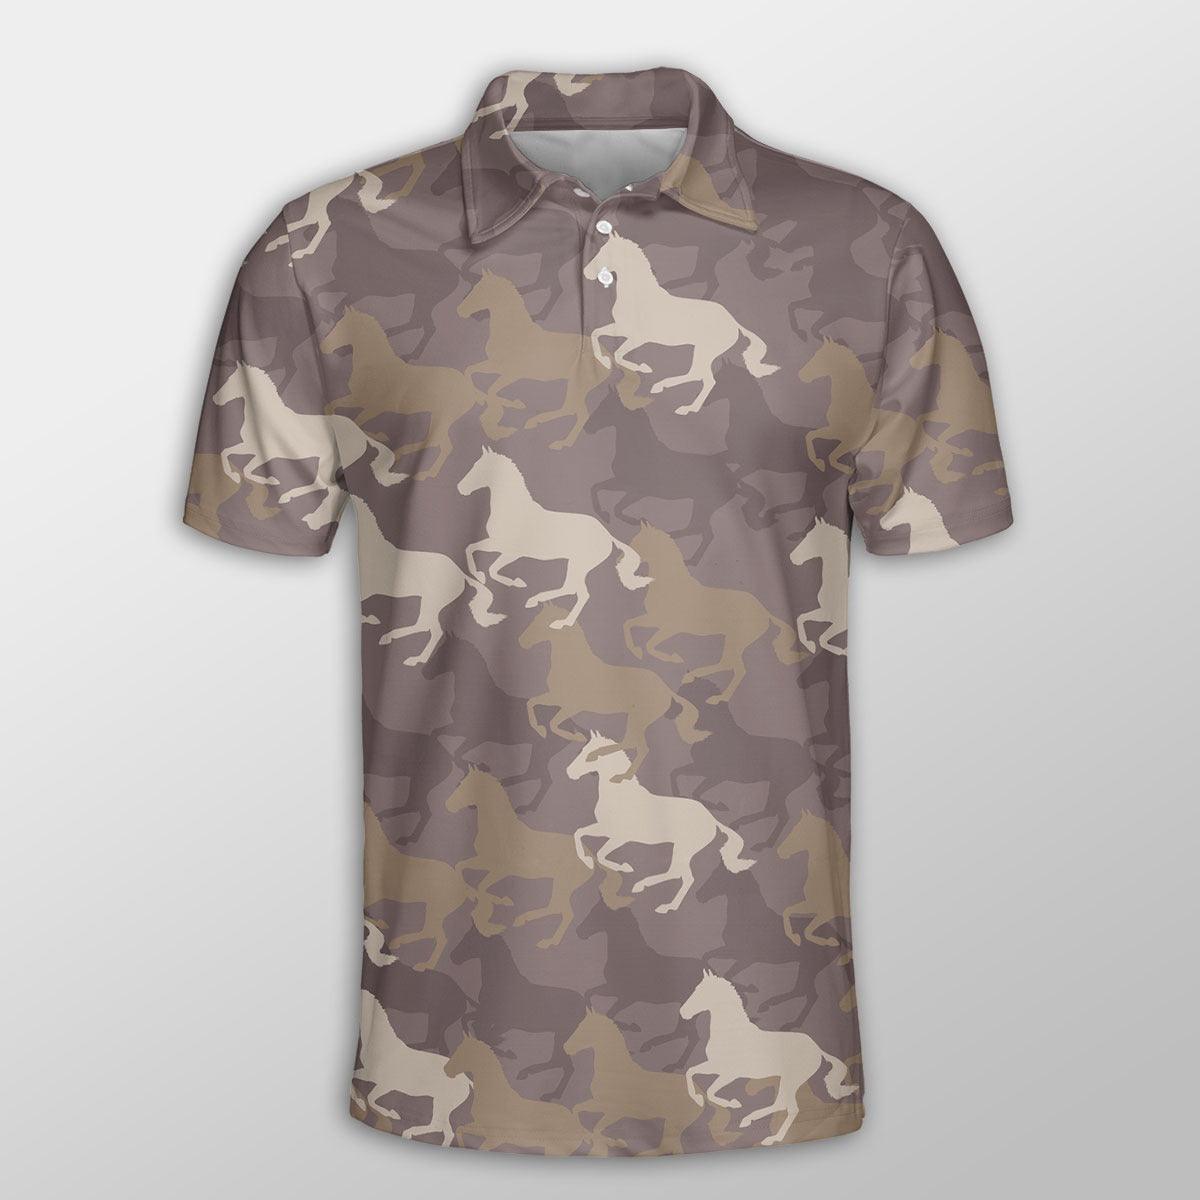 Horse Men Polo Shirts For Summer -Horse Camouflage Pattern Shirts For Men - Perfect Gift For Horse Lovers, Cattle Lovers - Amzanimalsgift